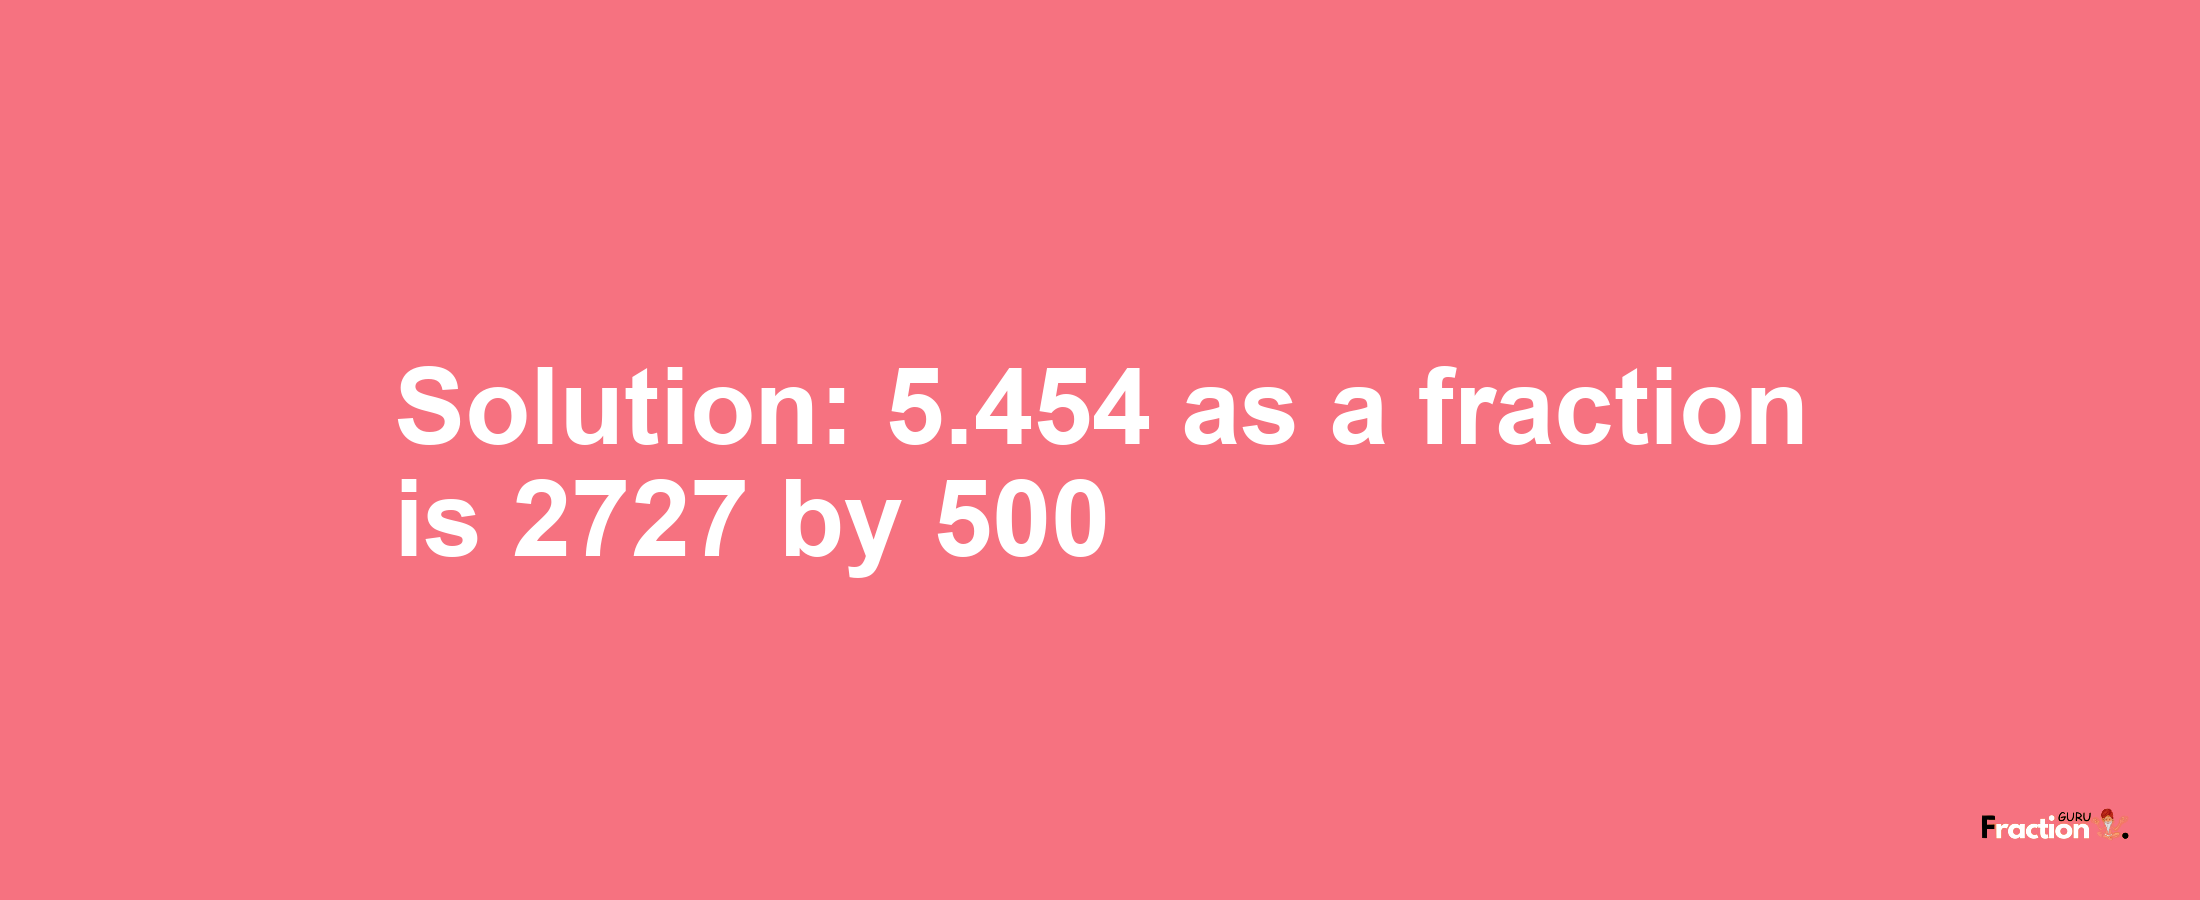 Solution:5.454 as a fraction is 2727/500